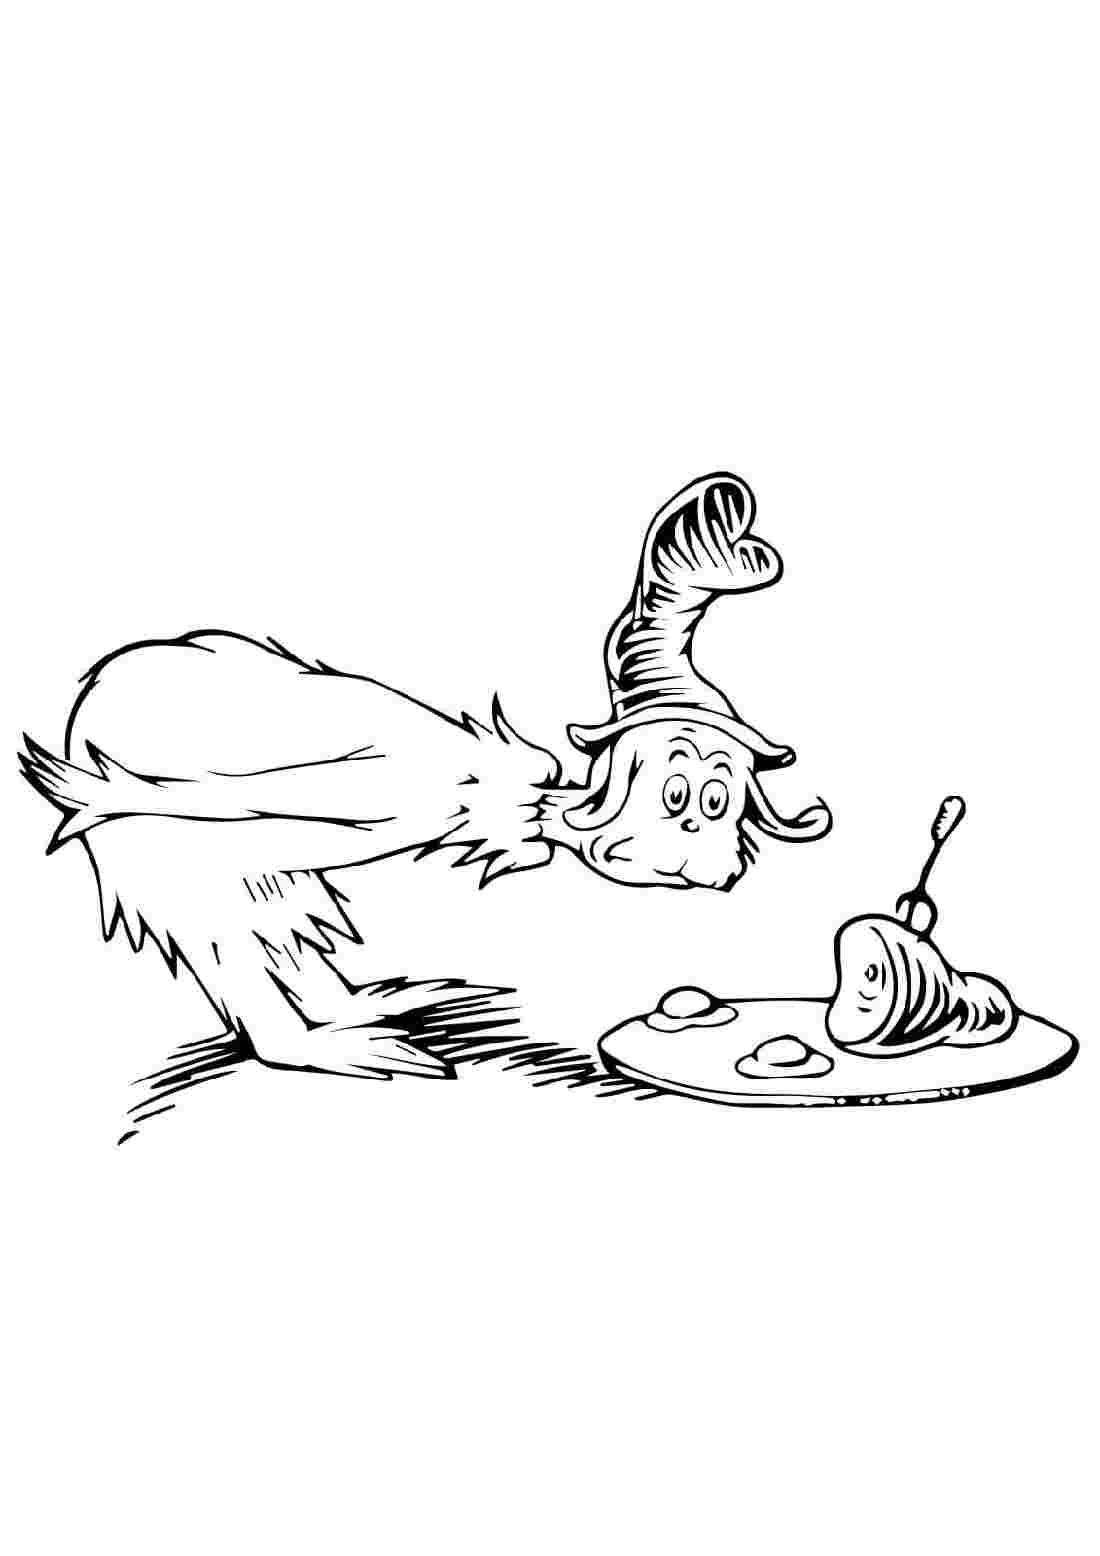 green eggs and ham coloring pages green eggs and ham coloring page  twisty noodle green and eggs coloring pages ham